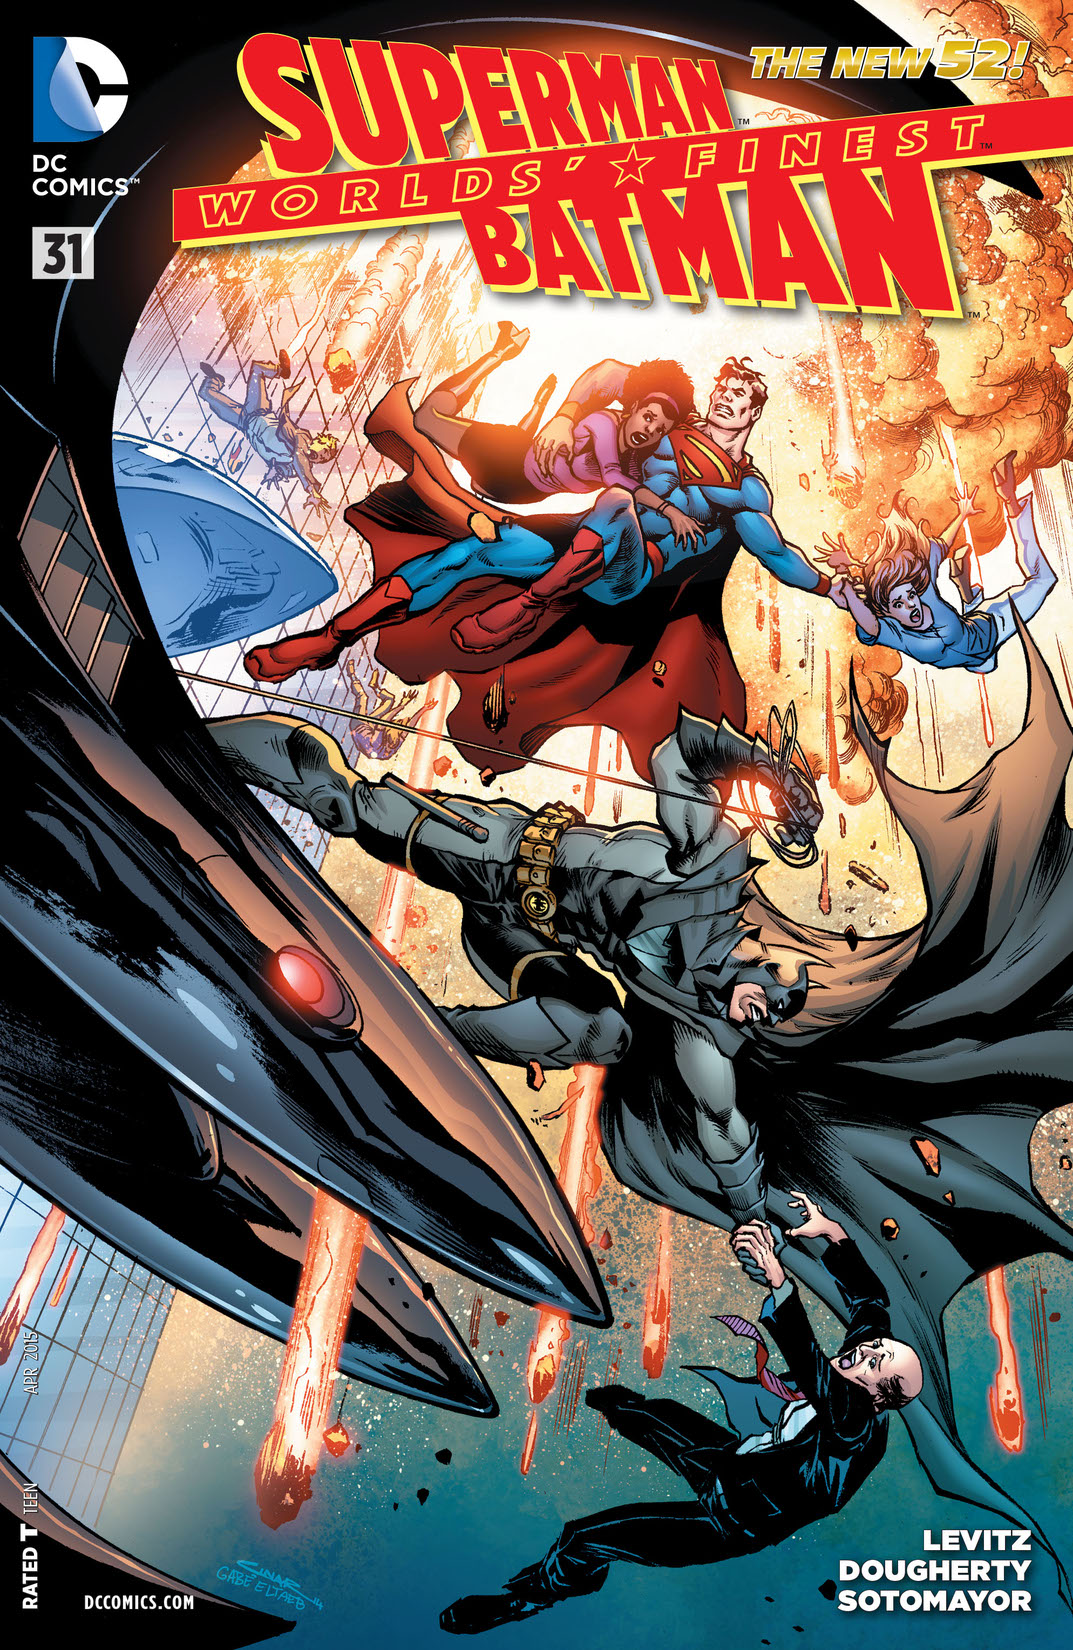 Worlds' Finest (2012-) #31 preview images